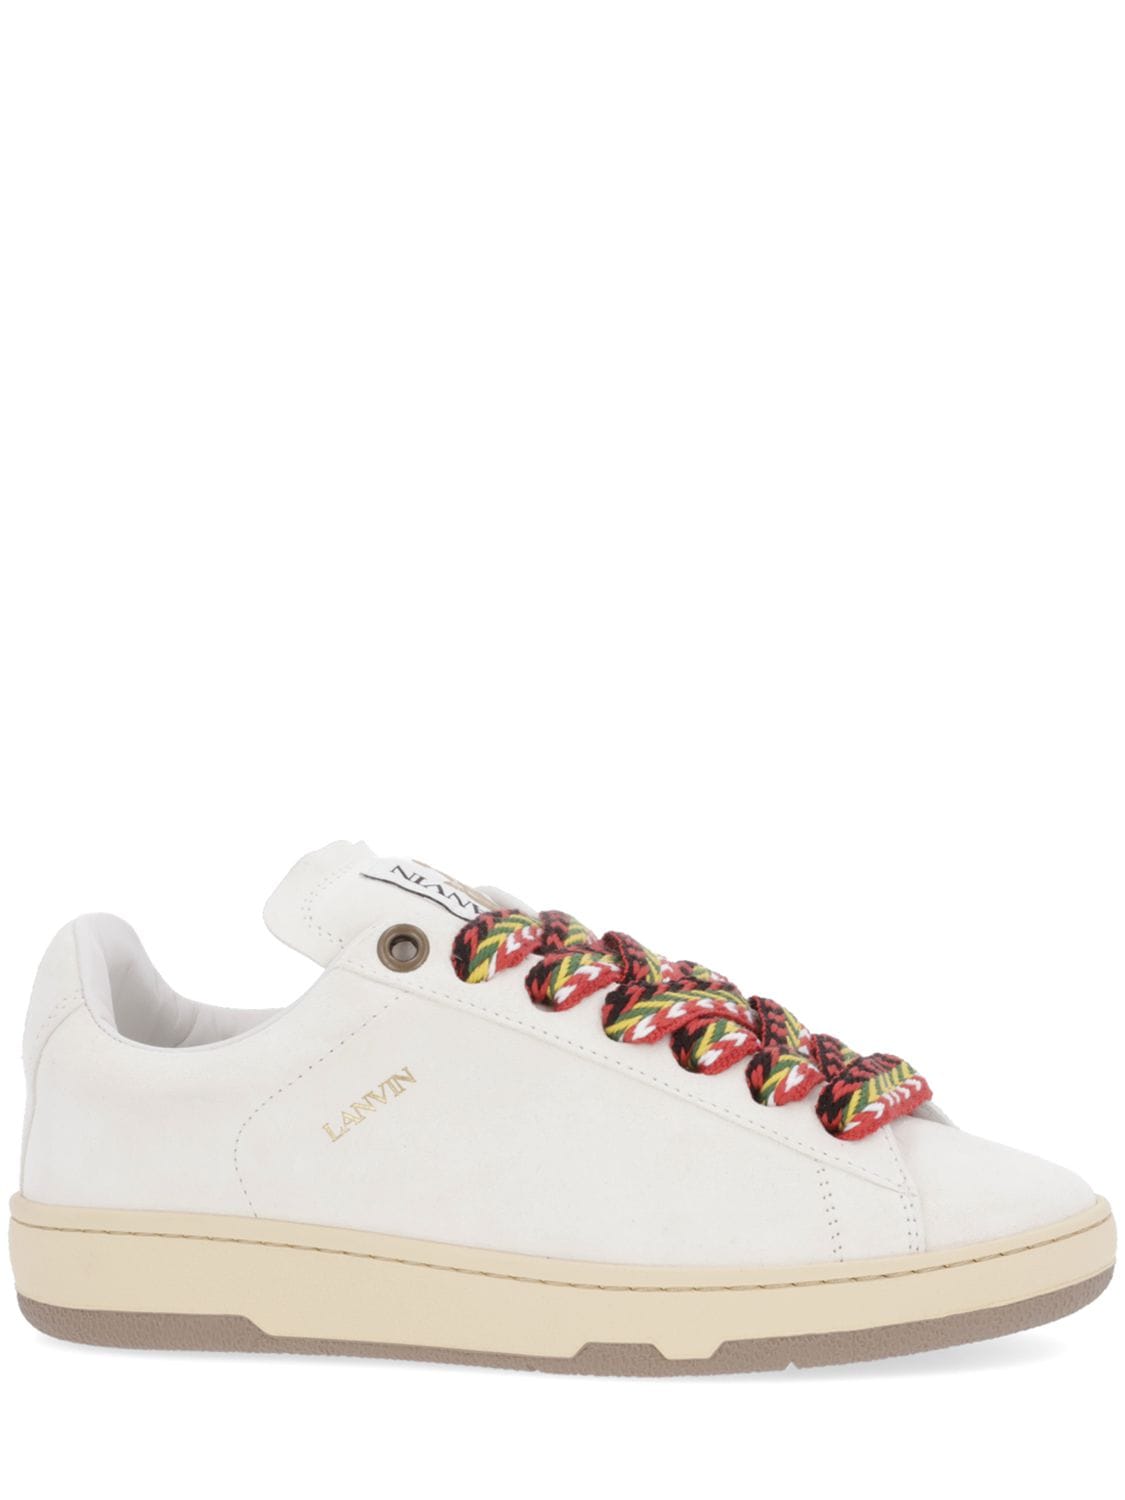 Lanvin 10mm Lite Curb Leather Low Top Sneakers In White